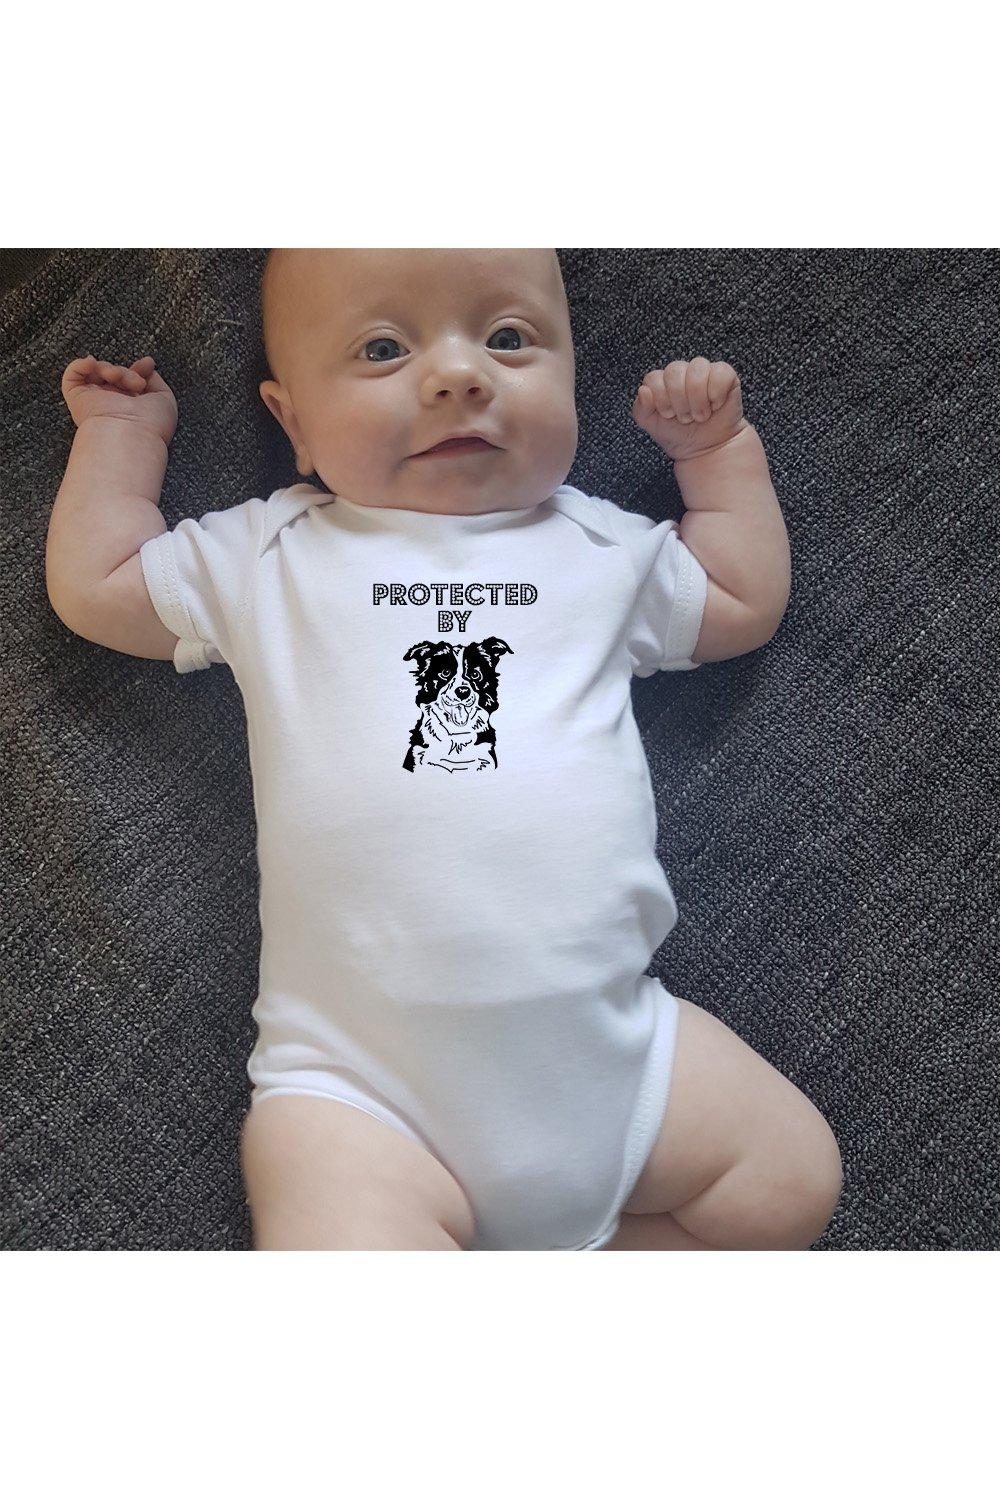 Protected by Border Collie Dog Baby bodysuit and Baby Grow